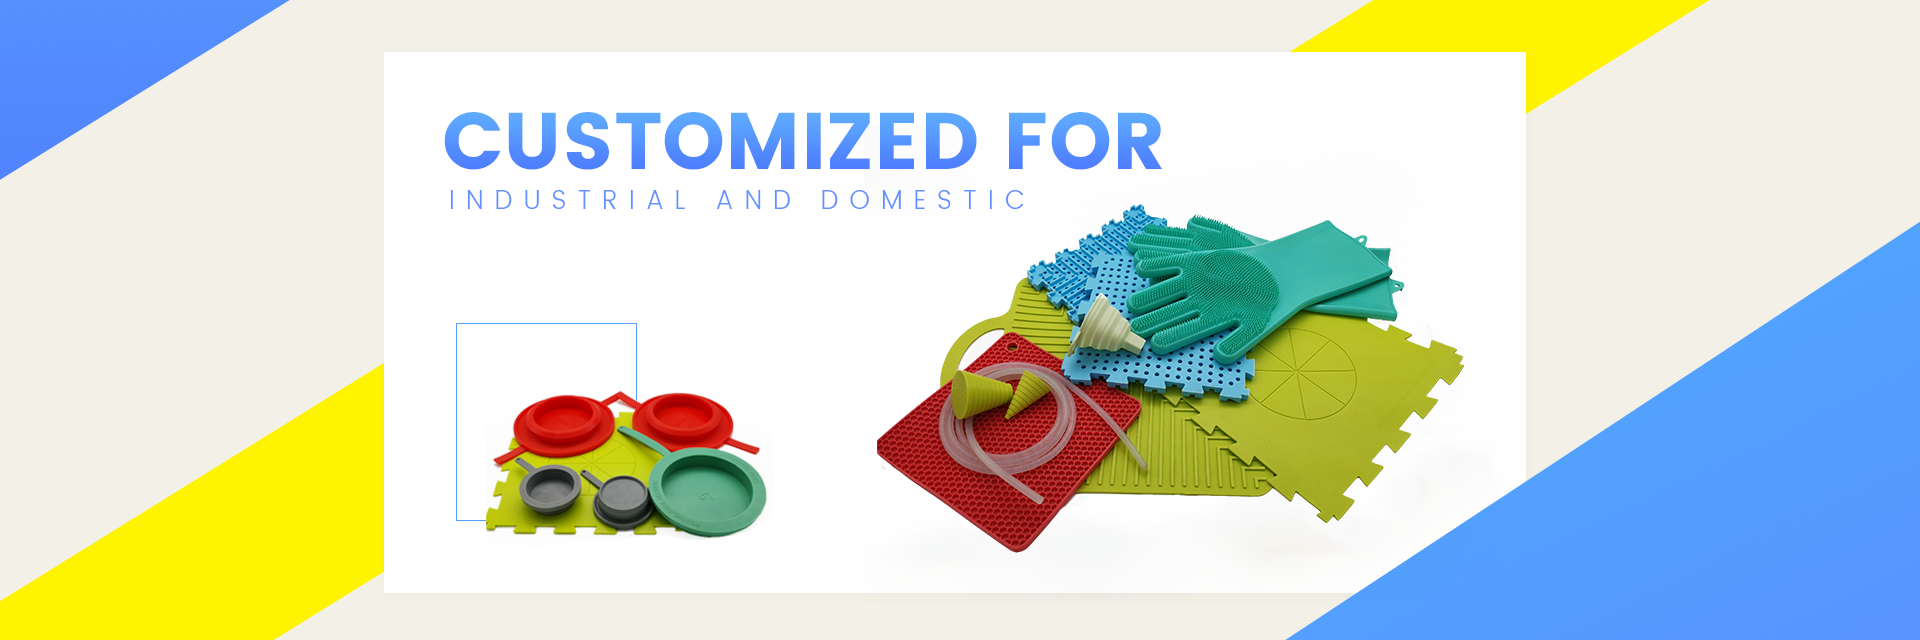 Customized silicone products